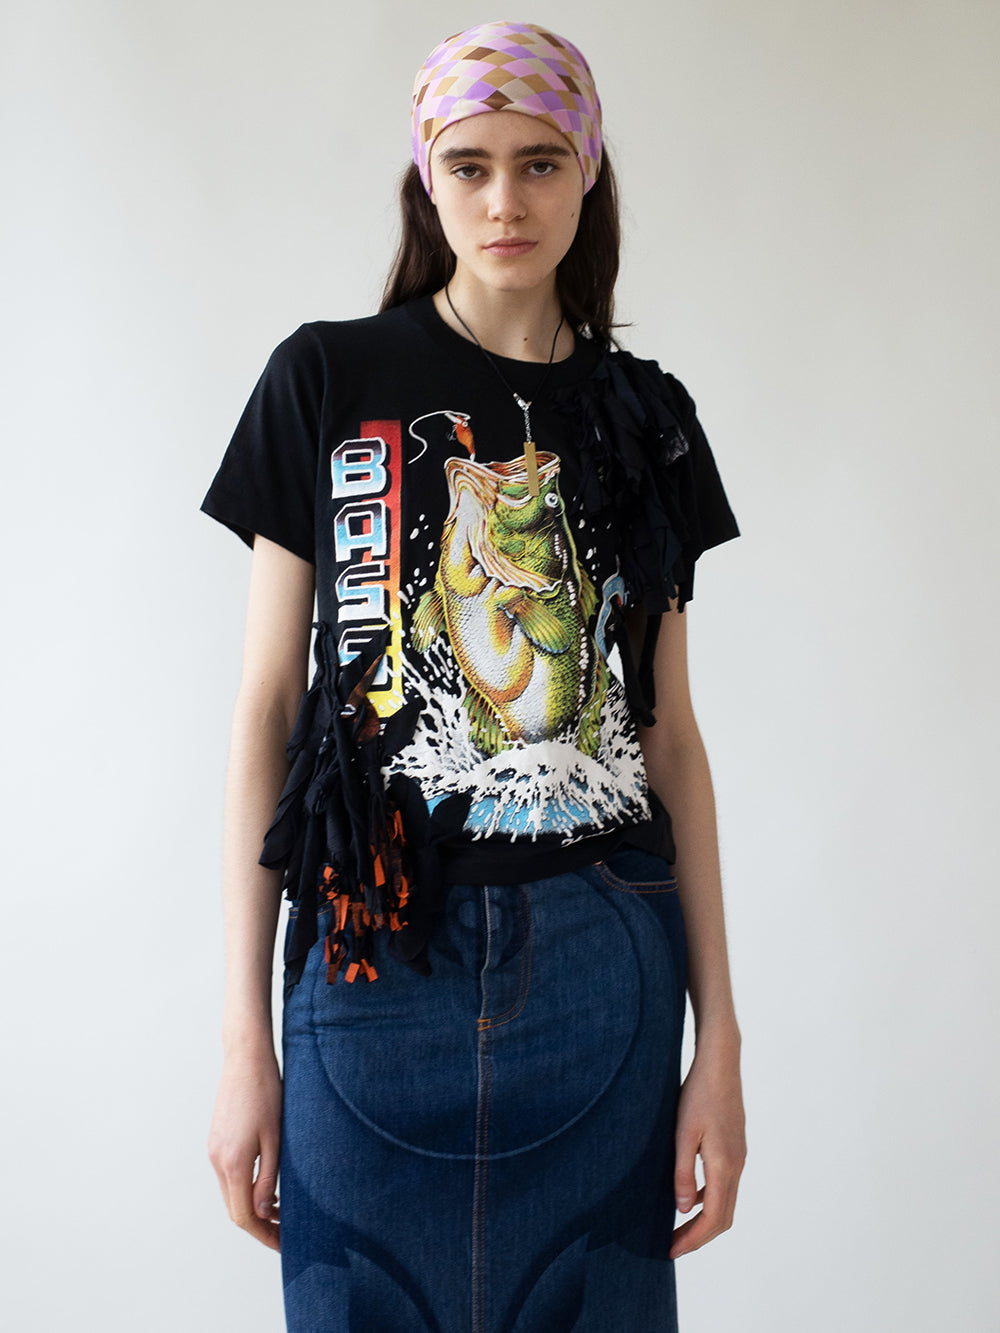 The Reconstituted Flower t-shirt